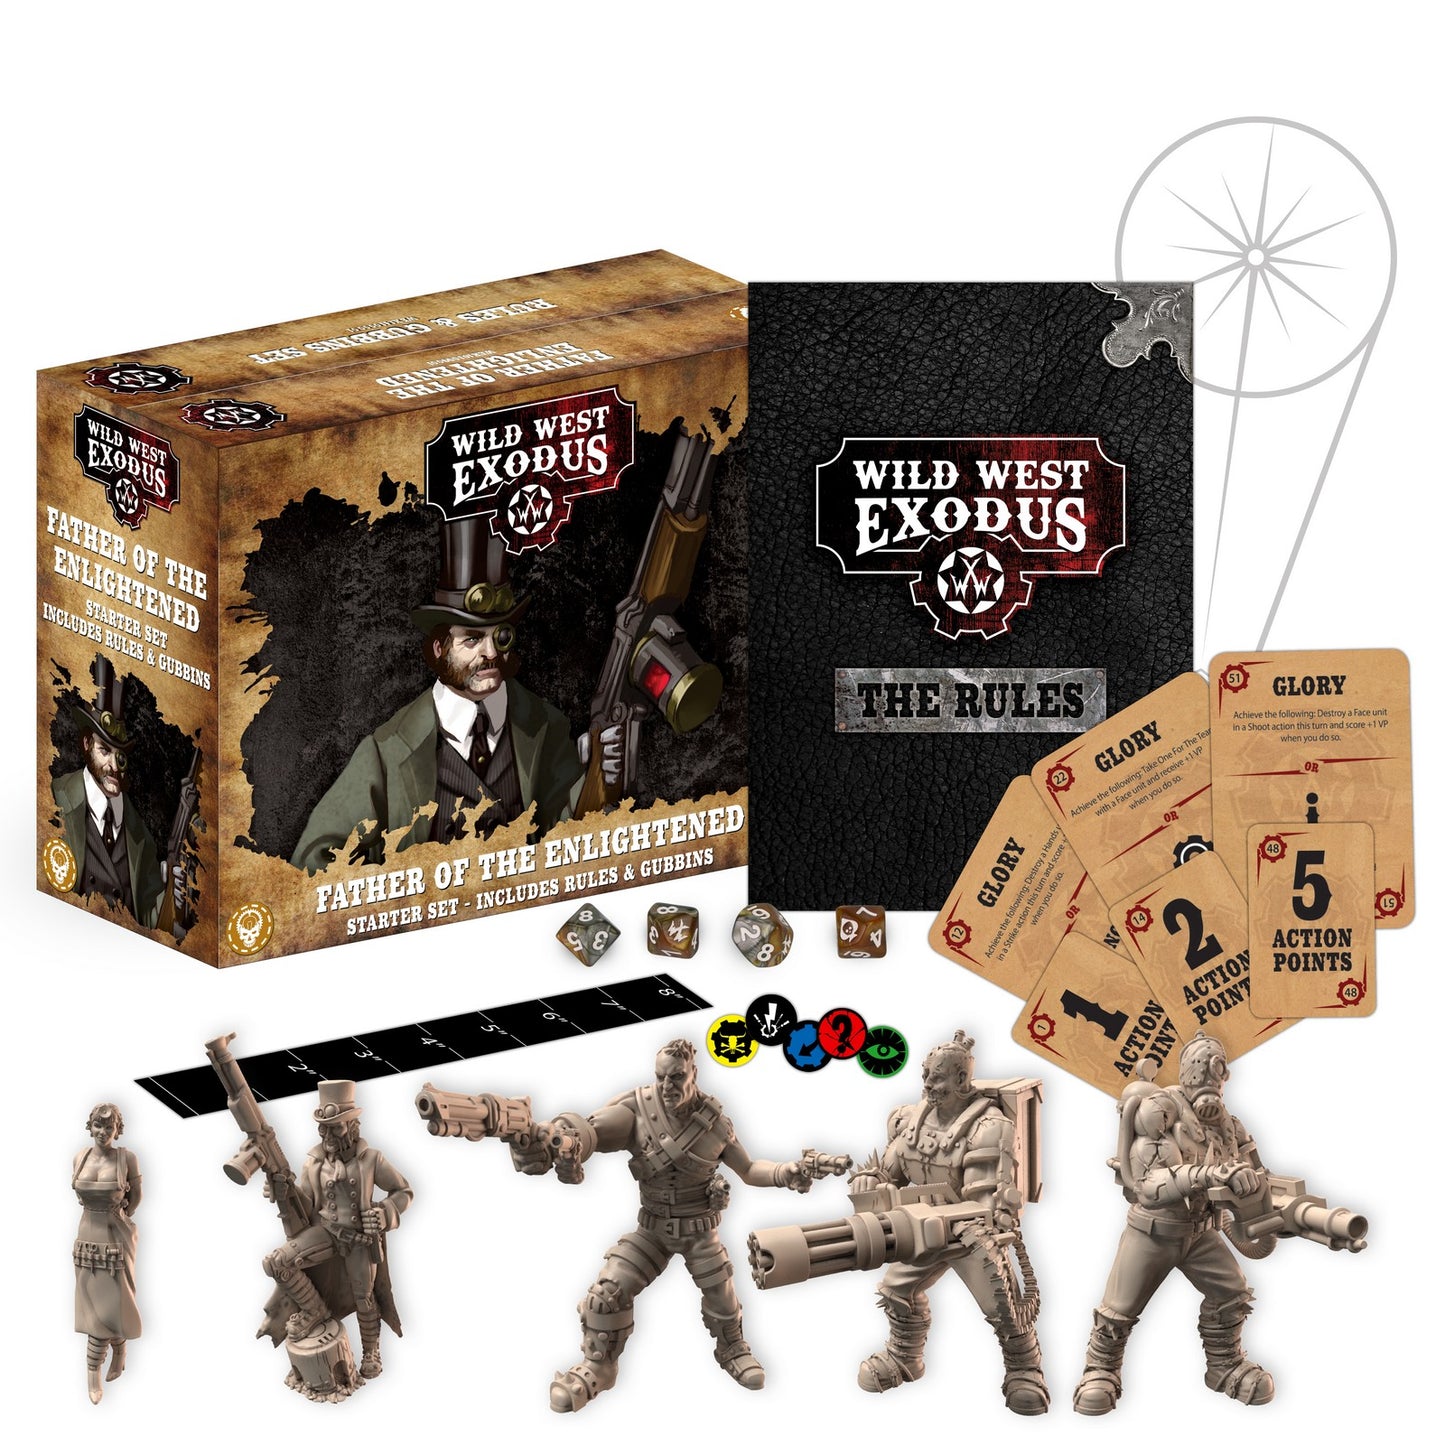 Wild West Exodus Father of the Enlightened Starter Set Wild West Exodus Wild West Exodus   